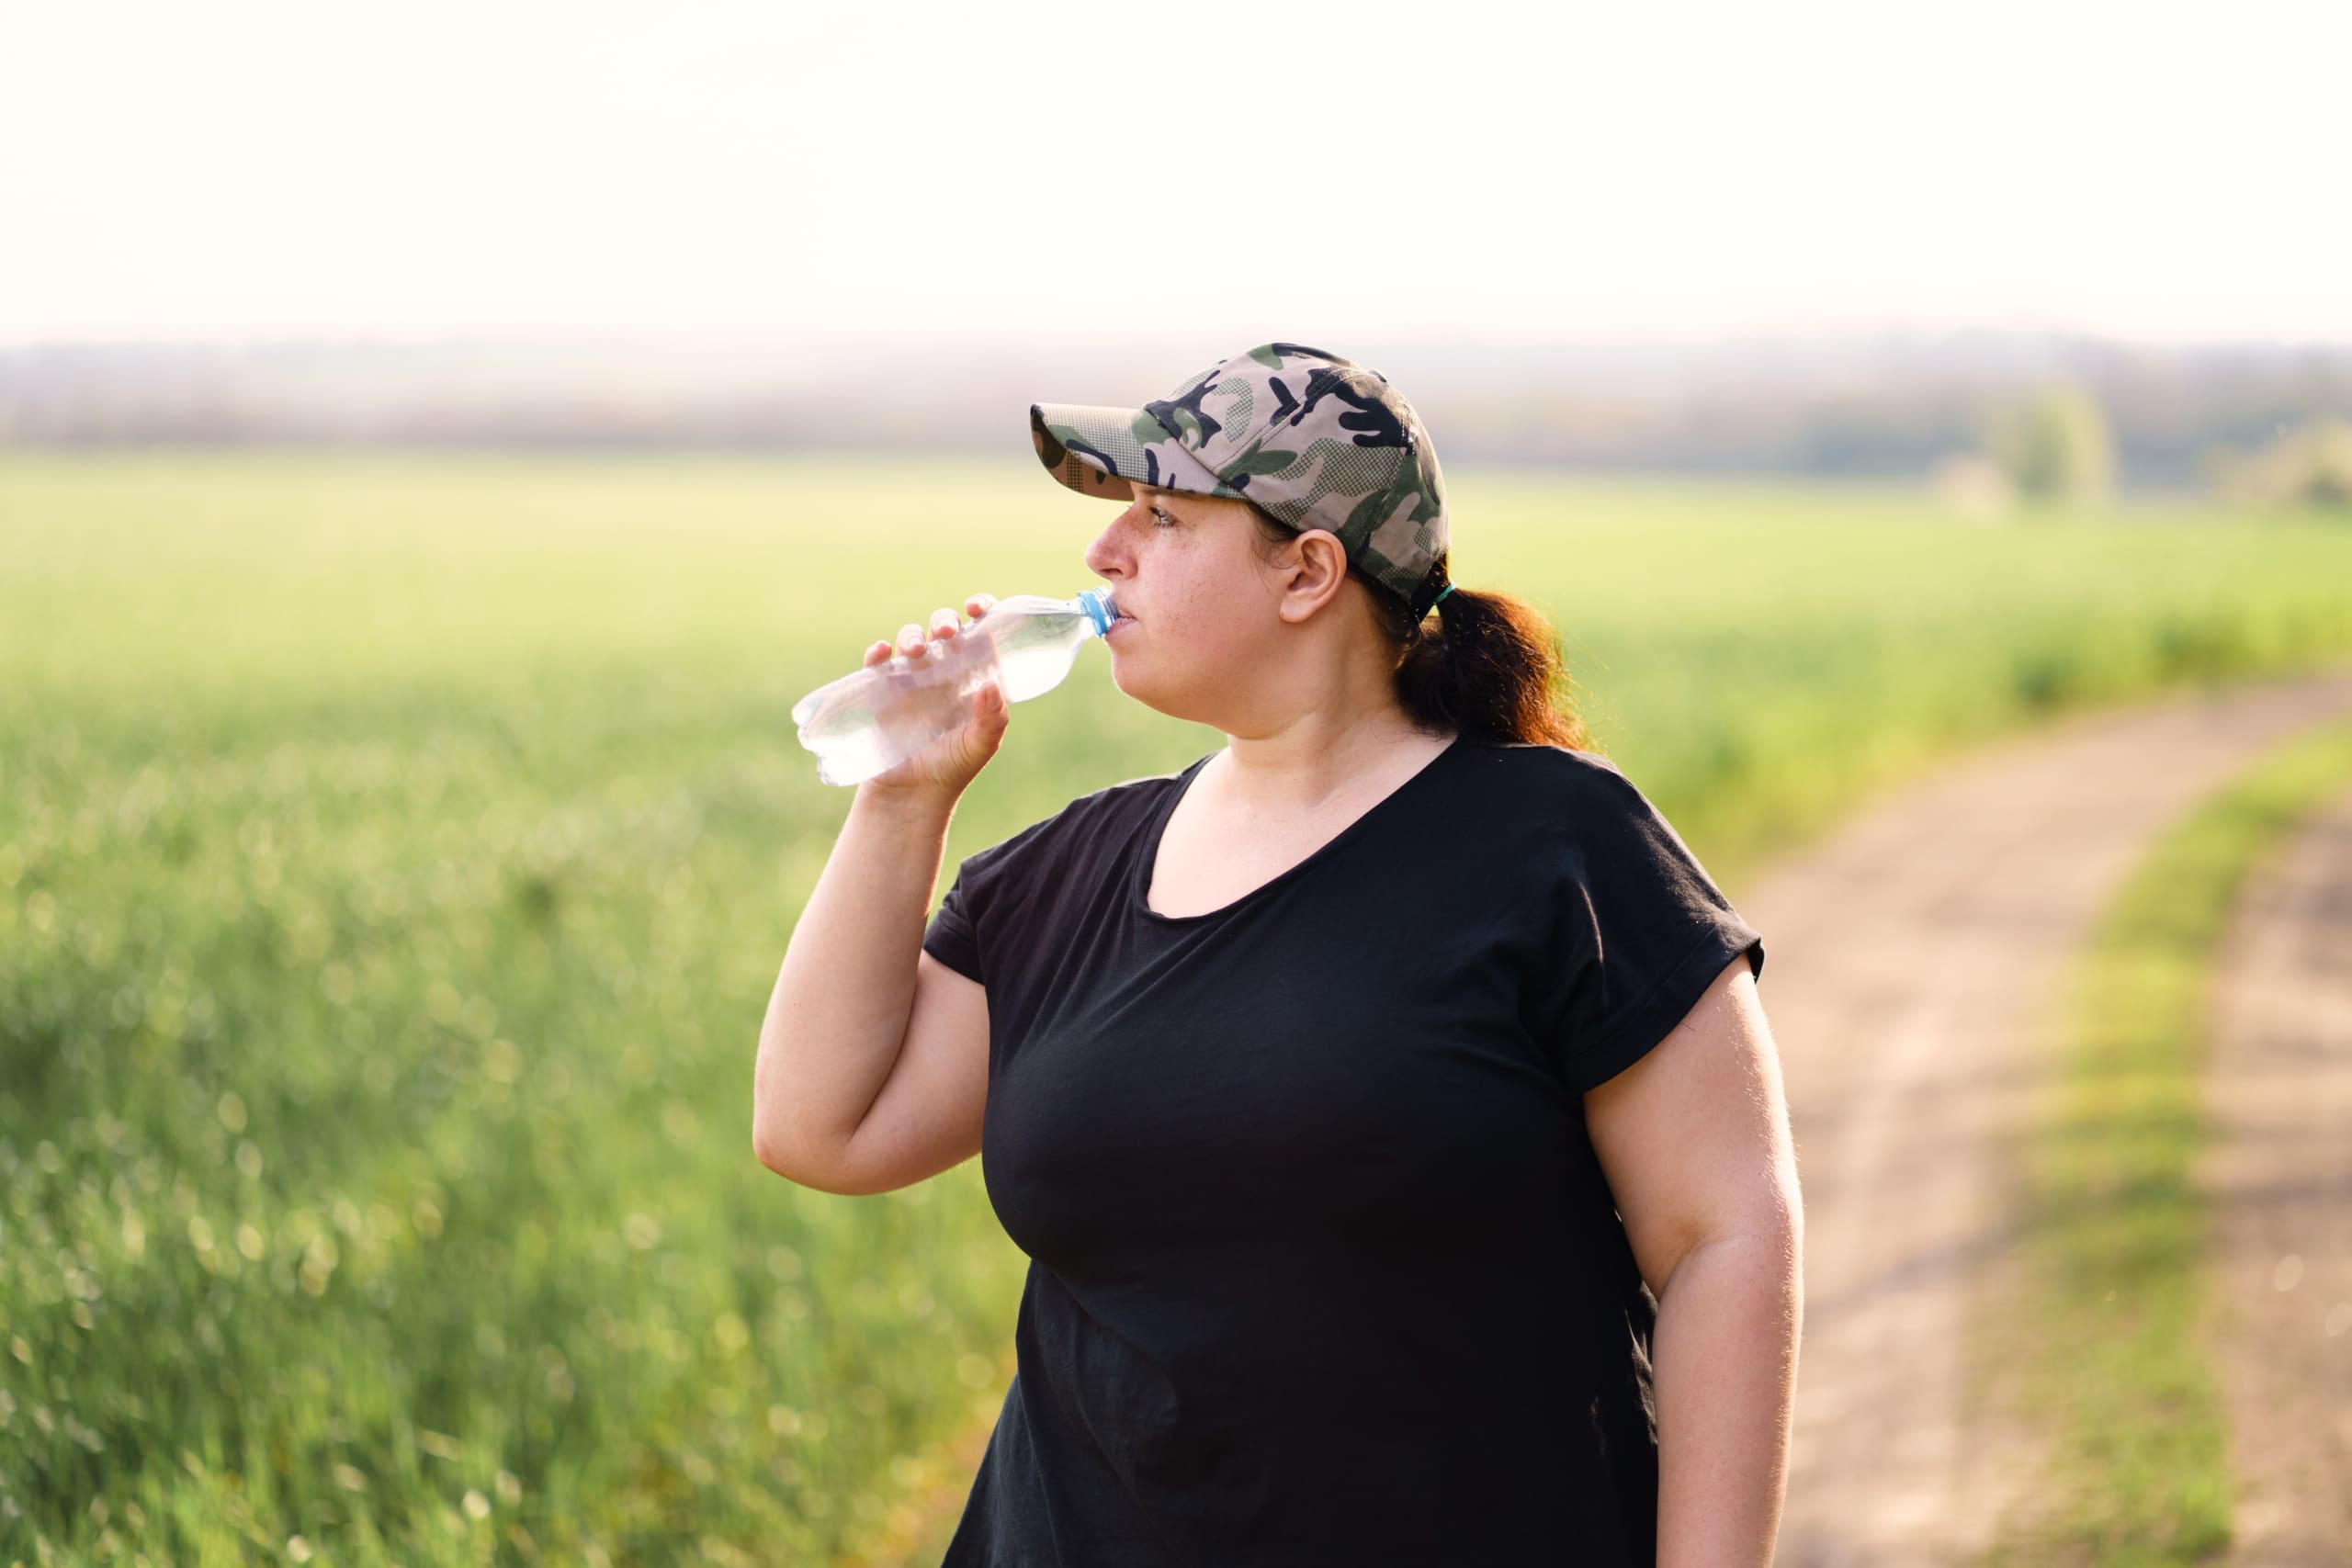 Young woman with metabolic syndrome drinks water after jogging outdoors.